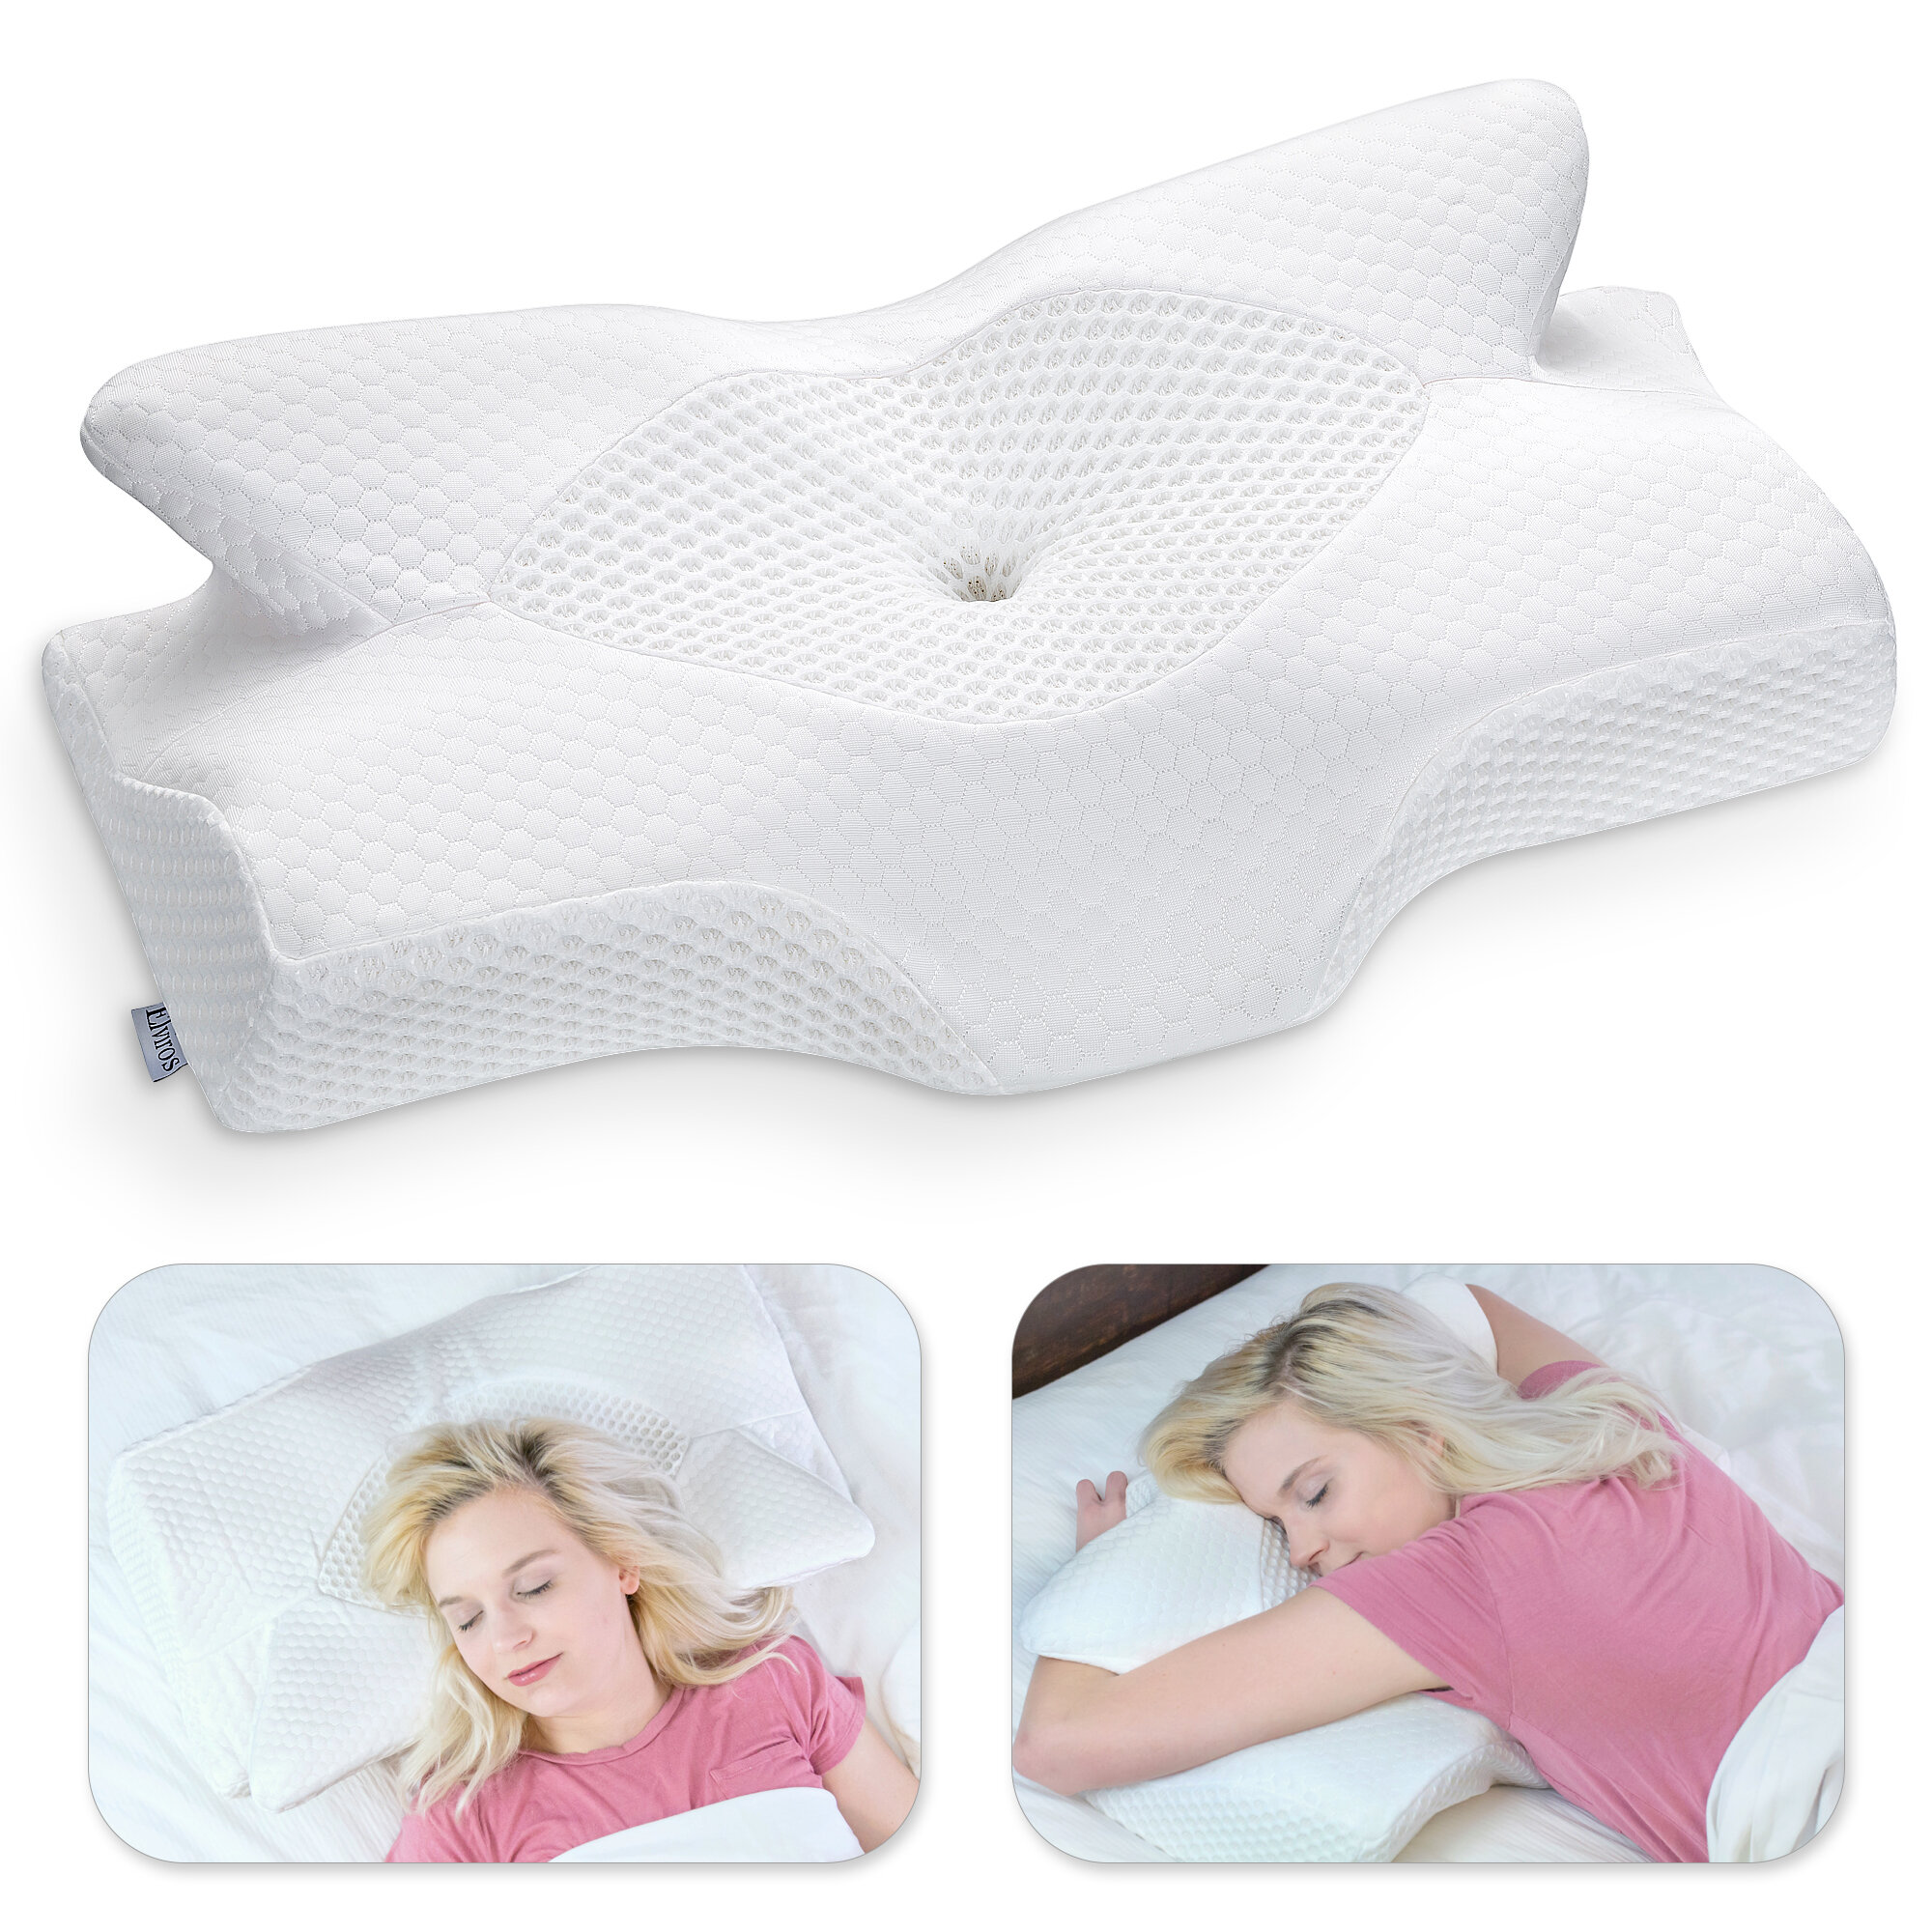 Memory Foam Pillow Neck Back Support Orthopaedic Firm Head Sleep Contour Pillows 